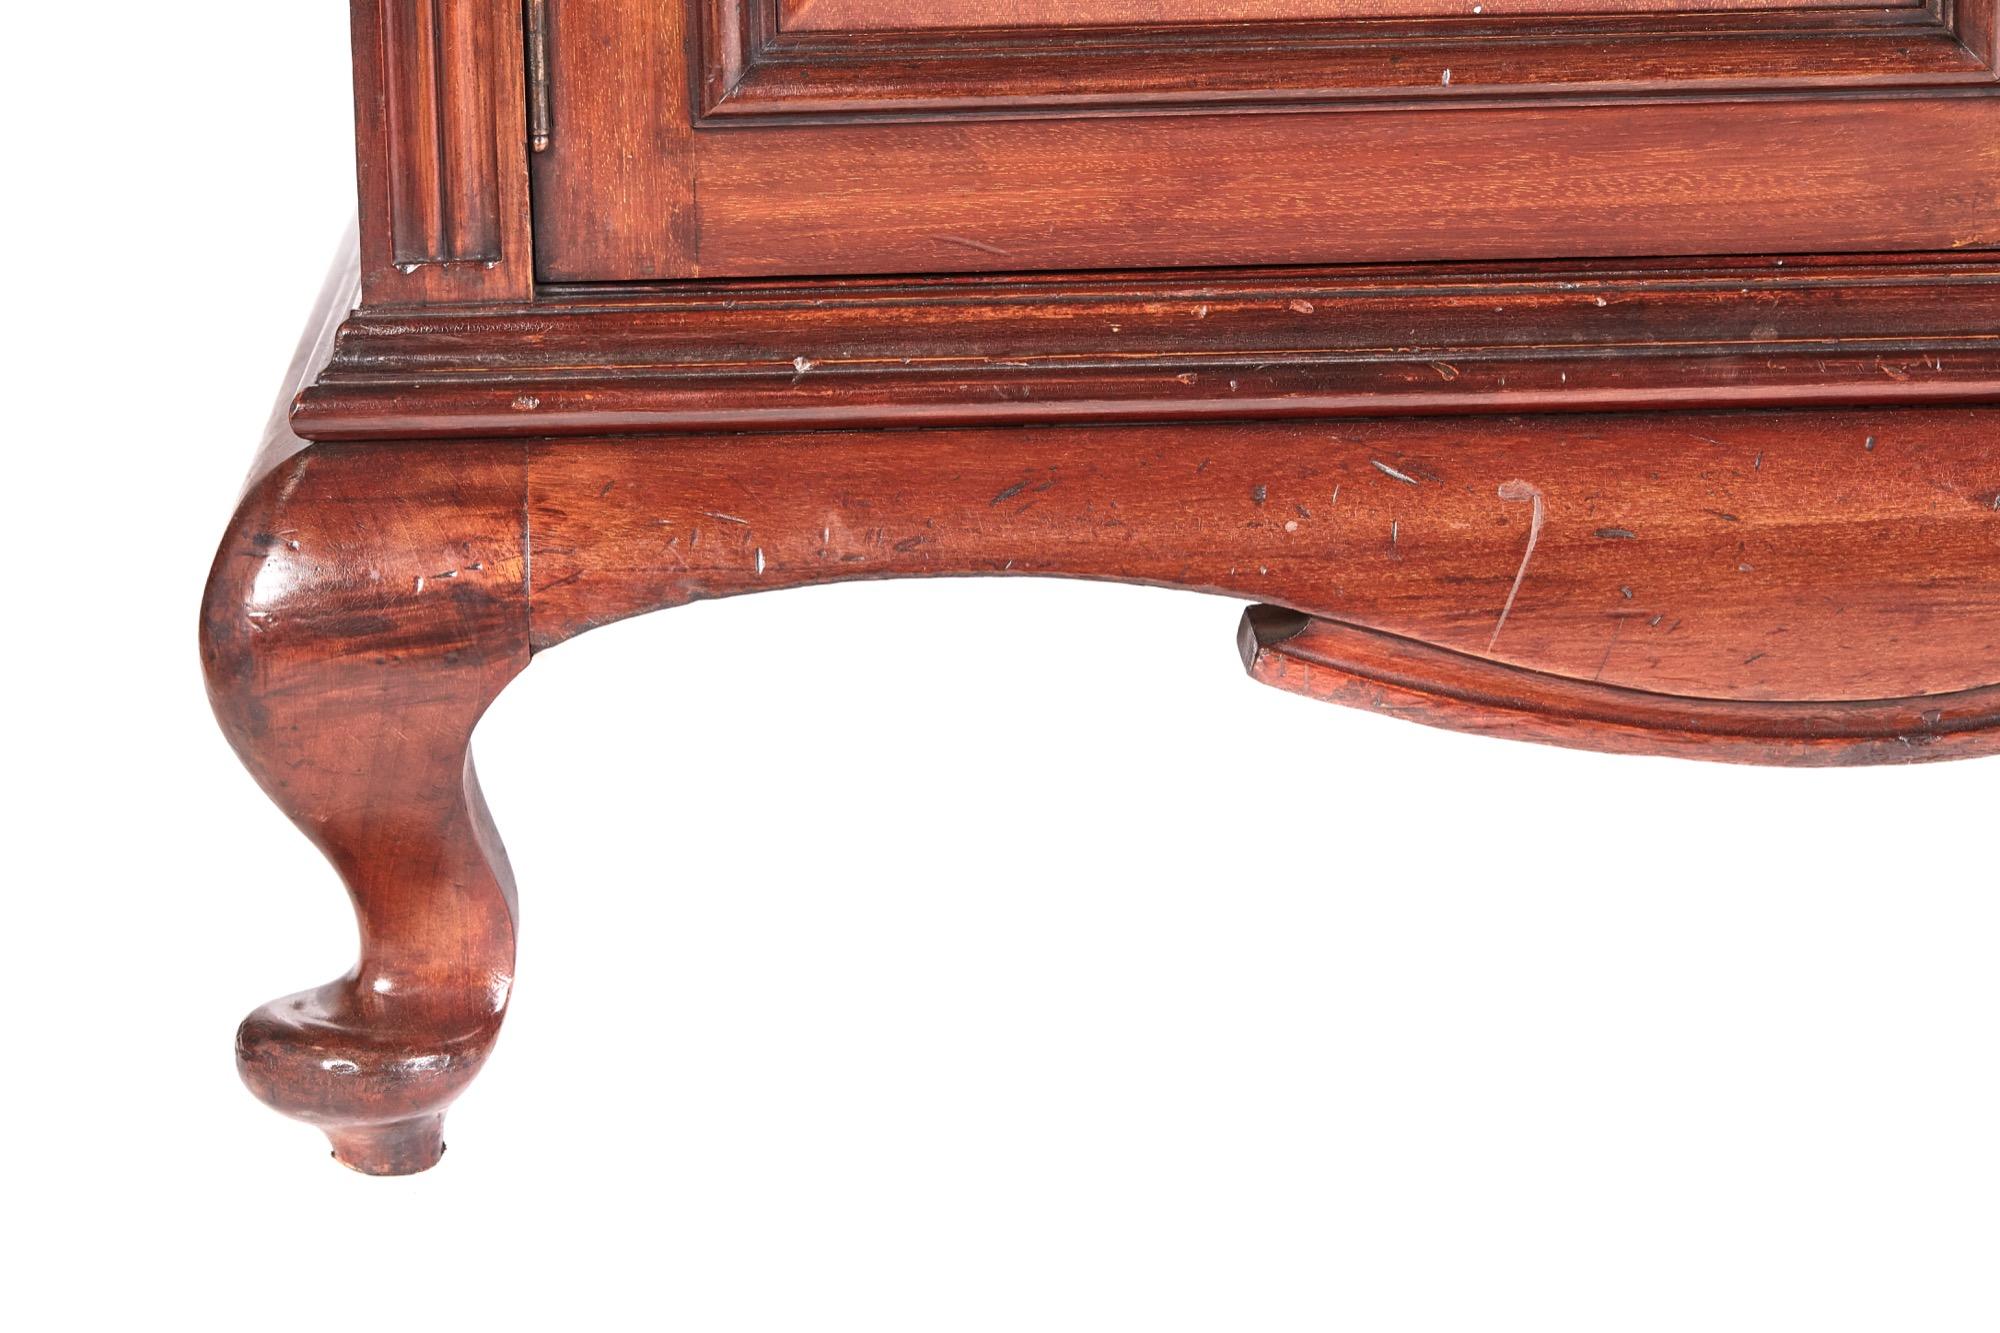 Quality Antique Carved Mahogany Sideboard by Maple & Co In Good Condition For Sale In Suffolk, GB